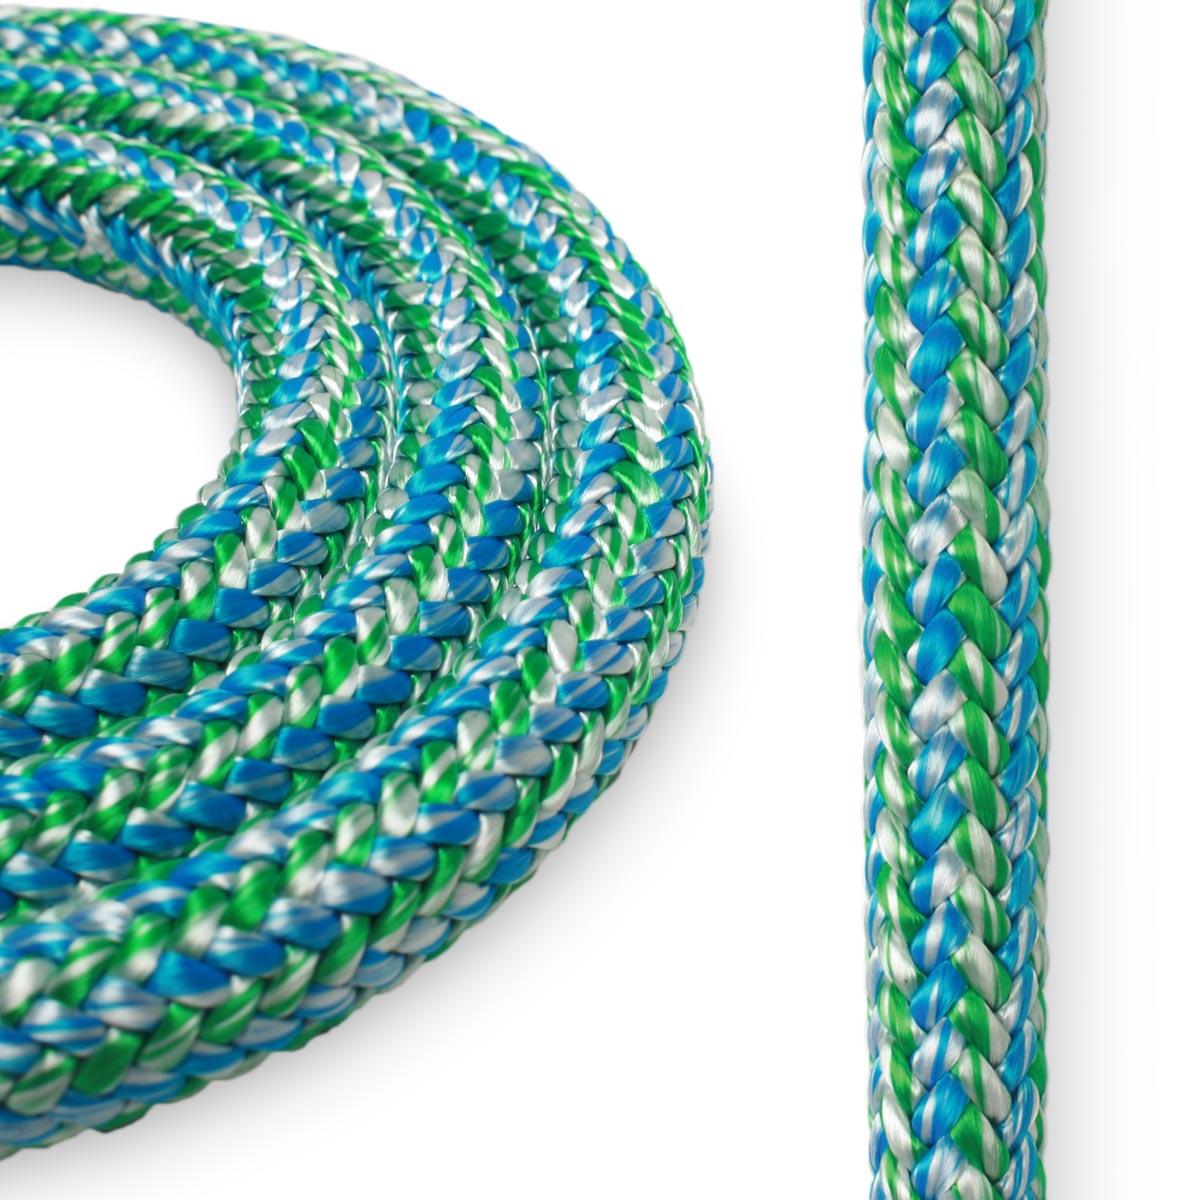 Non-Stretch, Solid and Durable Thin Nylon Rope 